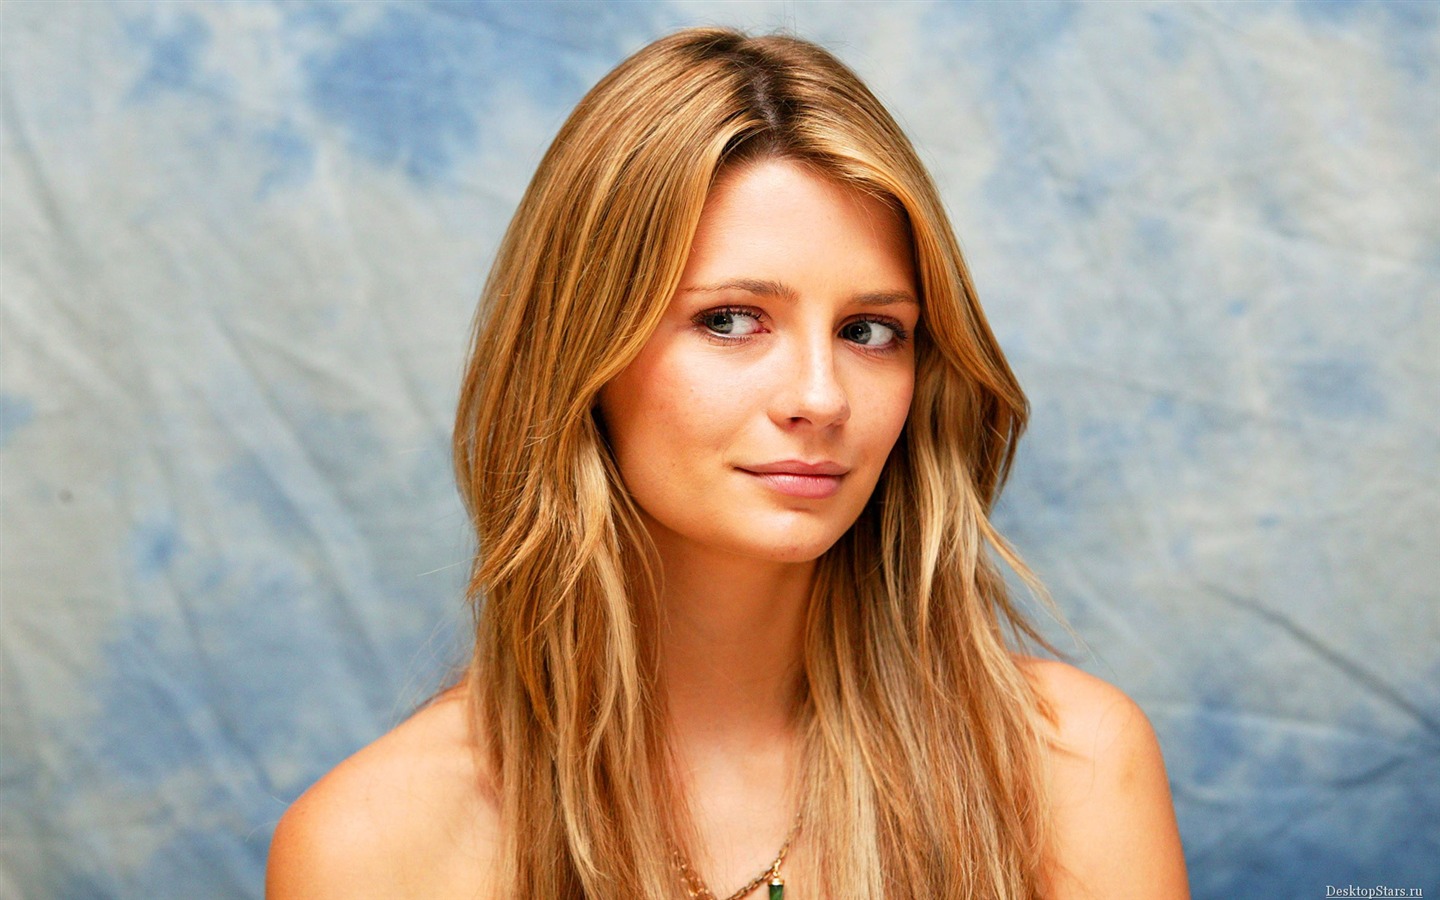 Mischa Barton #041 - 1440x900 Wallpapers Pictures Photos Images